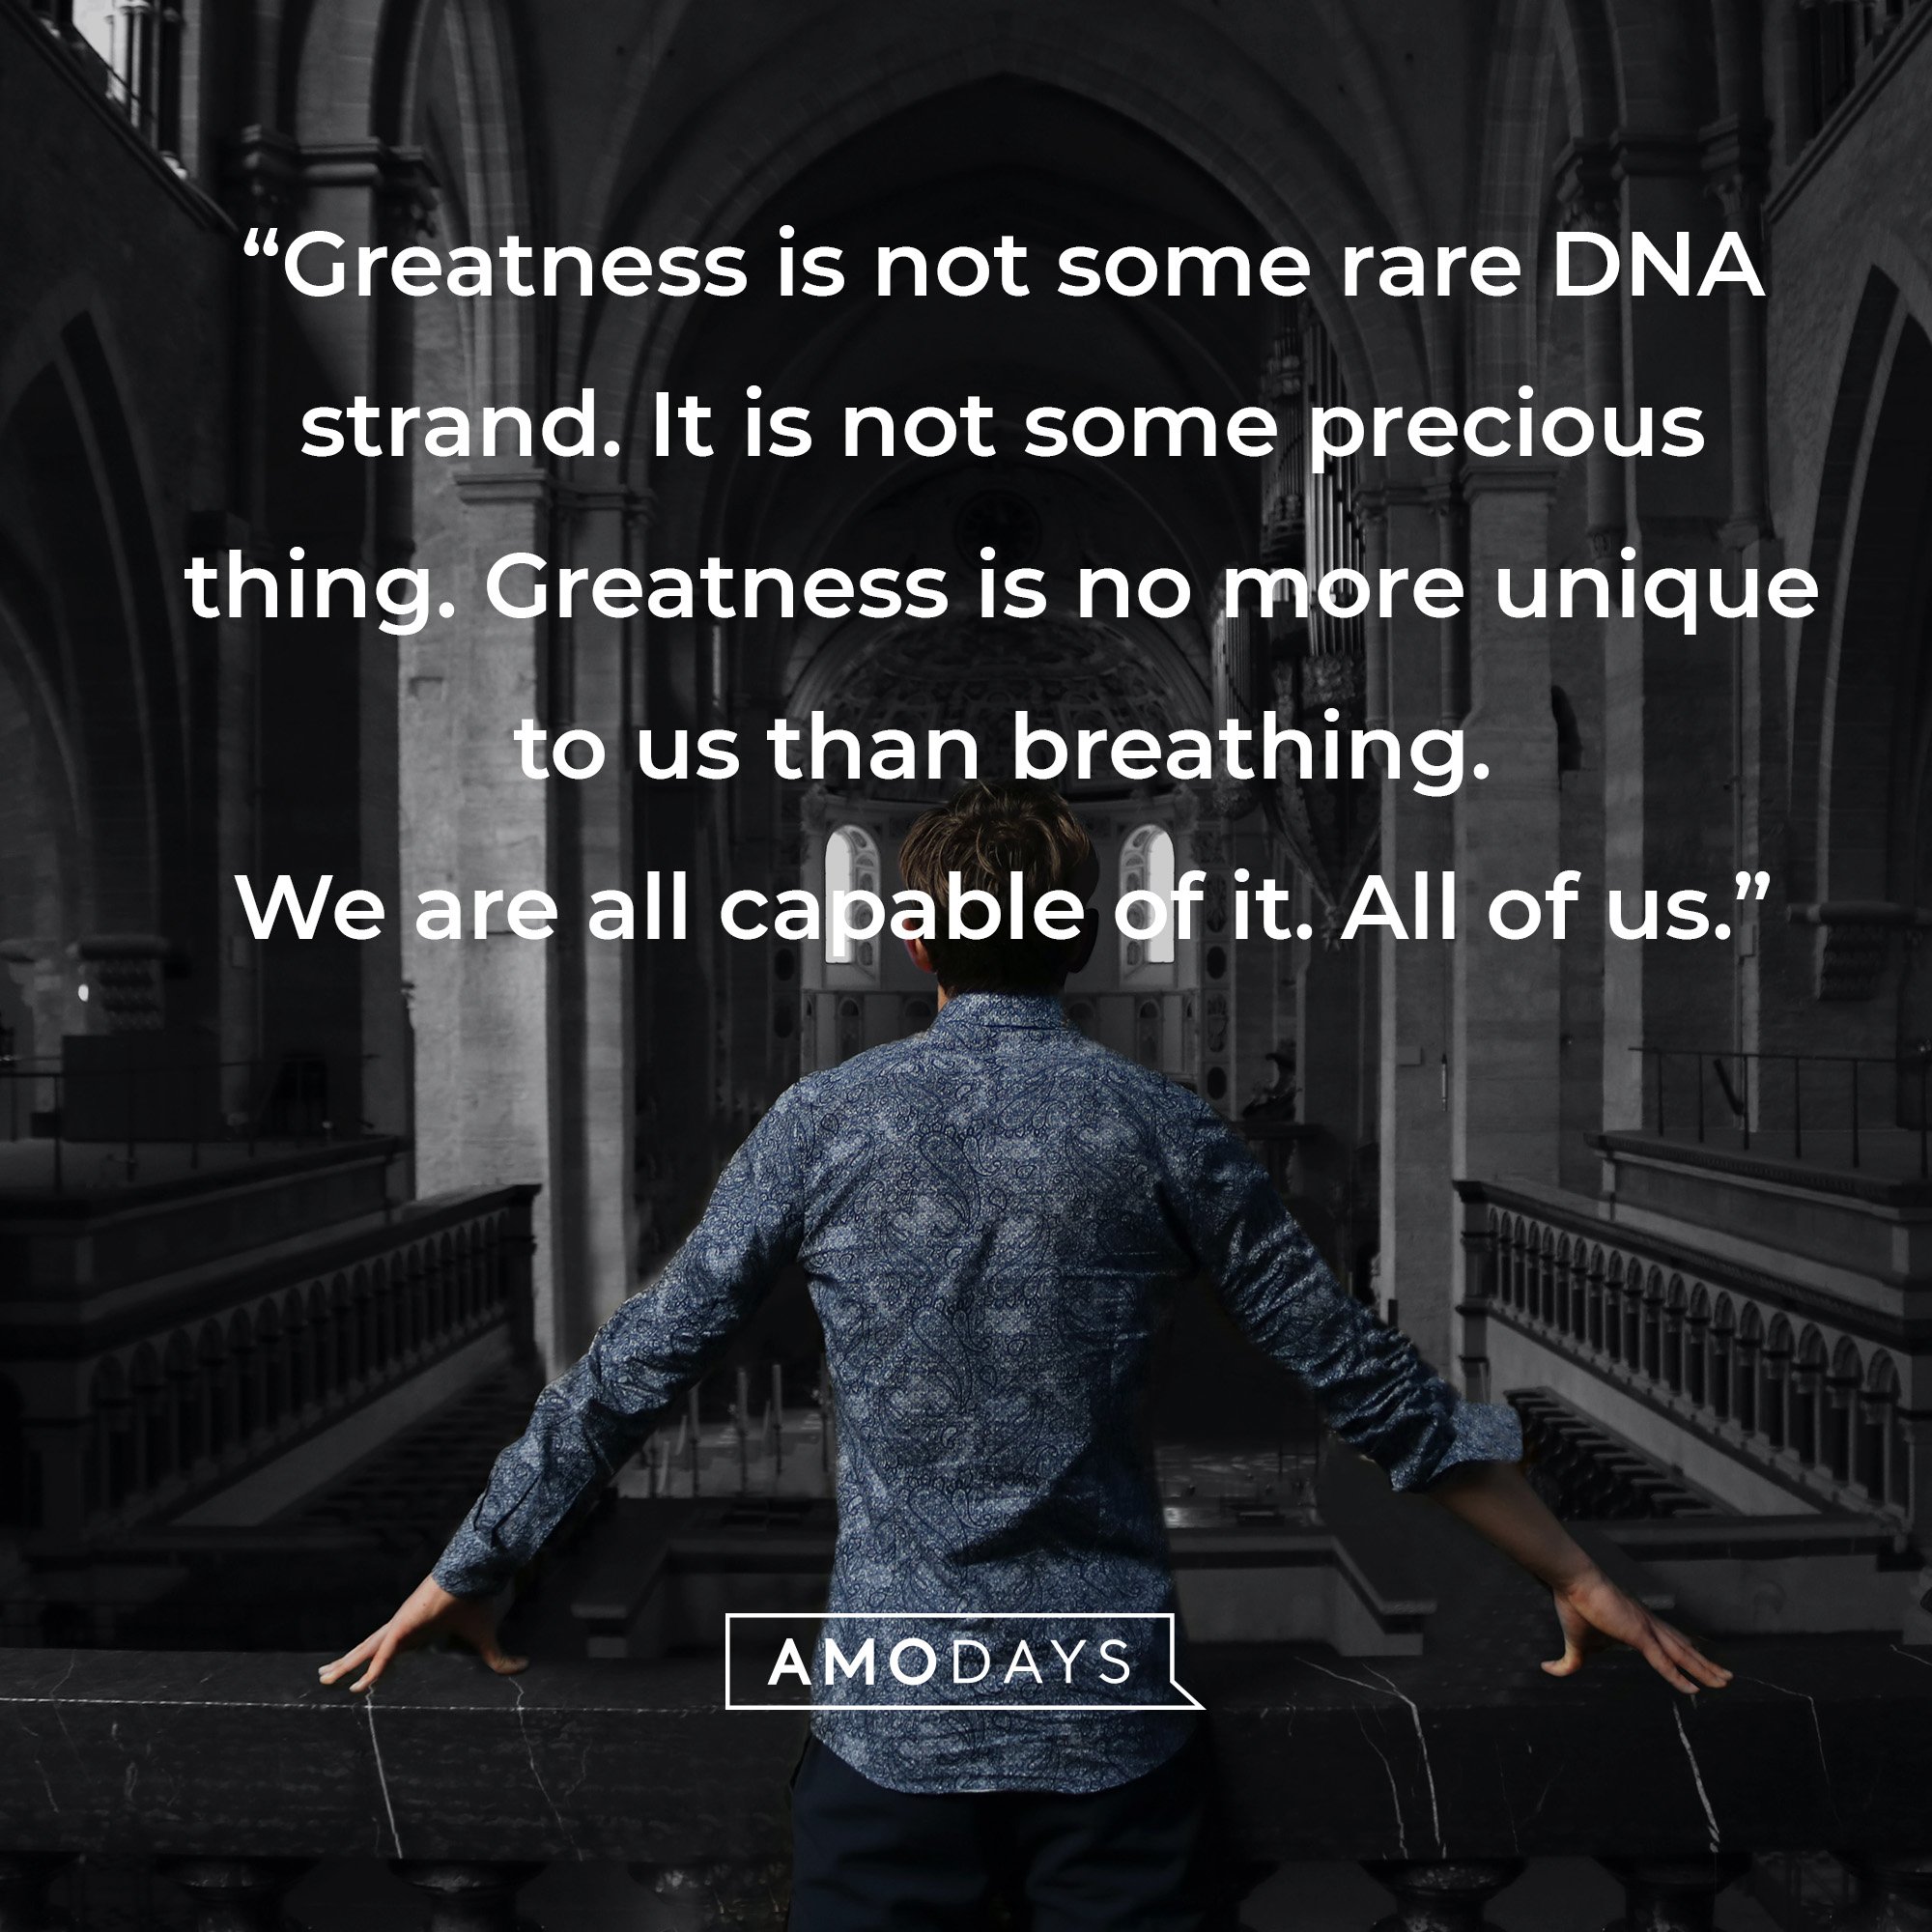 Nike’s quote: “Greatness is not some rare DNA strand. It is not some precious thing. Greatness is no more unique to us than breathing. We are all capable of it. All of us."  | Image: AmoDays